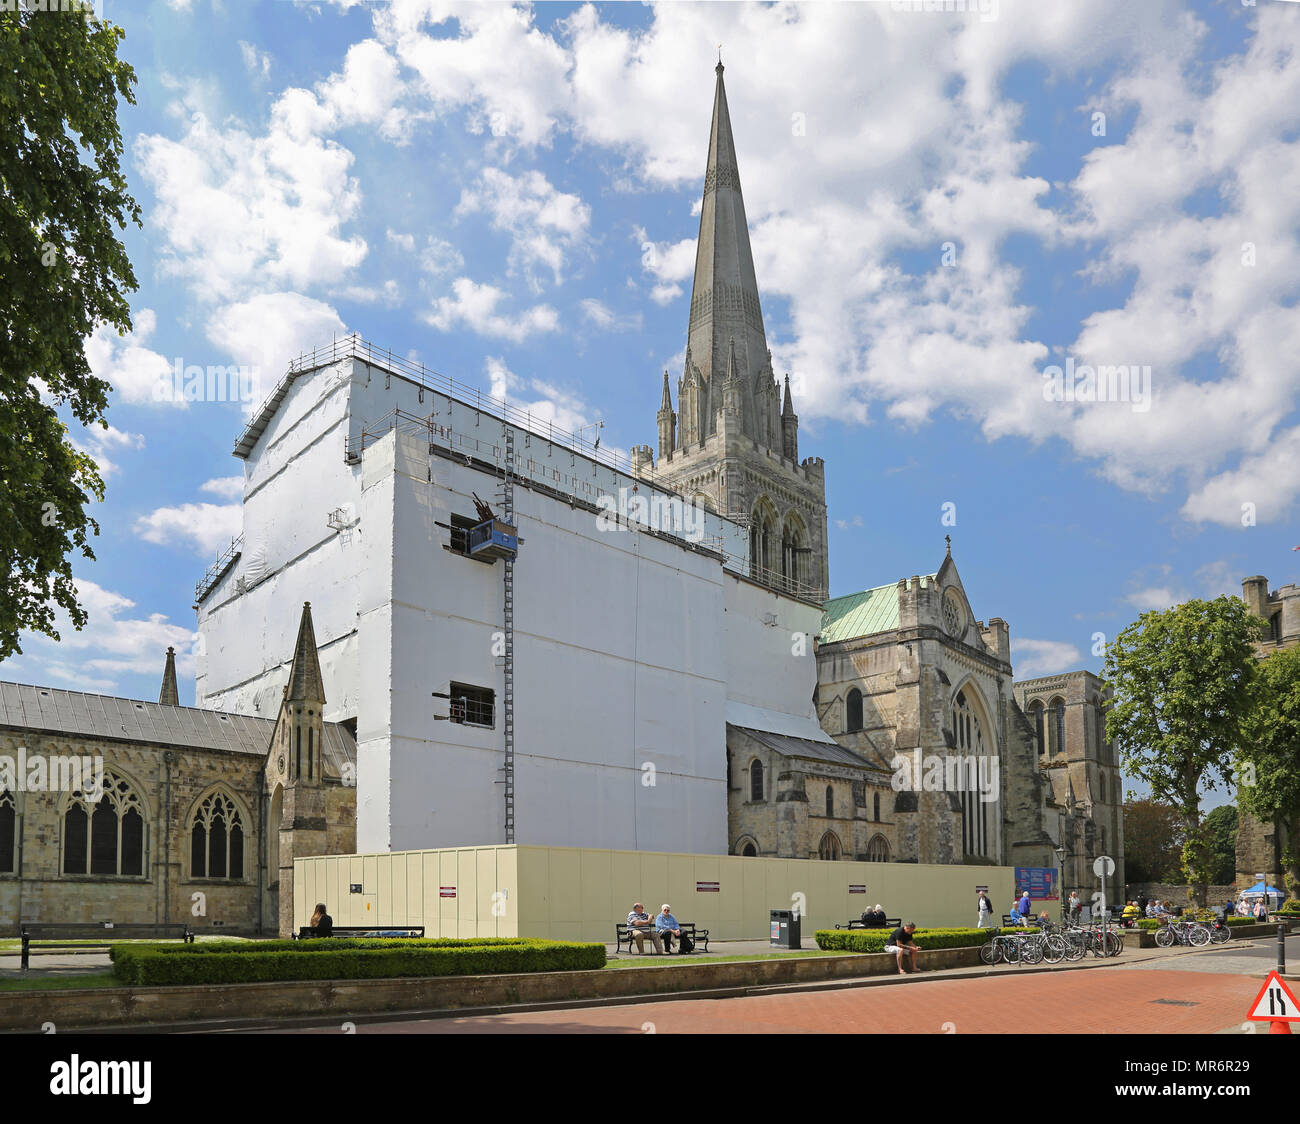 Scaffolding surrounds the chancel at Chichester Cathedral, West Sussex. The structure provides access and weather protection for major roof repairs. Stock Photo